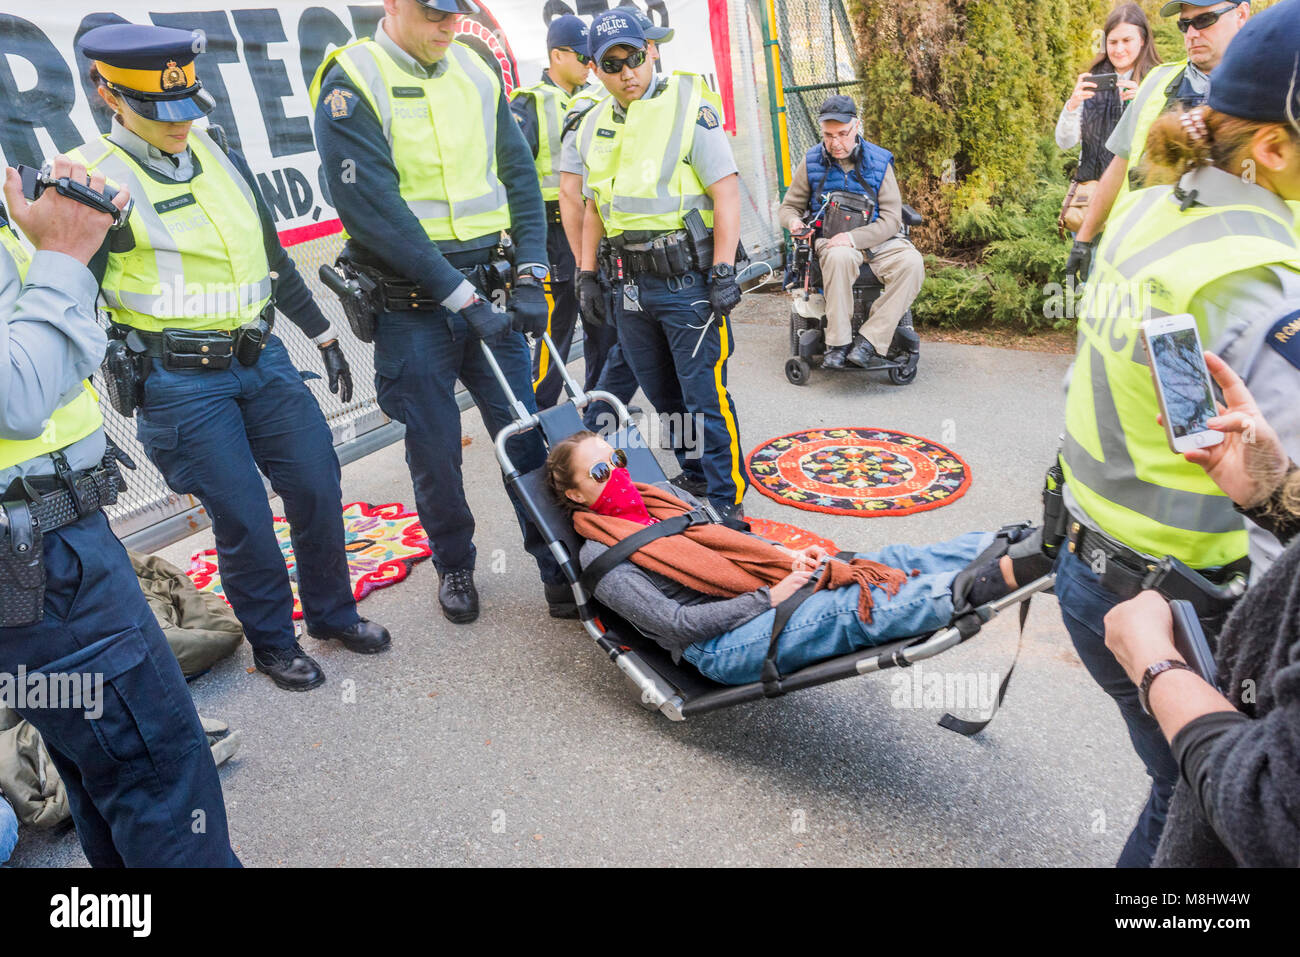 Anti Pipeline protester arrested at entrance to Kinder Morgan Pipeline Terminal, Burnaby, British Columbia, Canada. Credit: Michael Wheatley/Alamy Live News Stock Photo